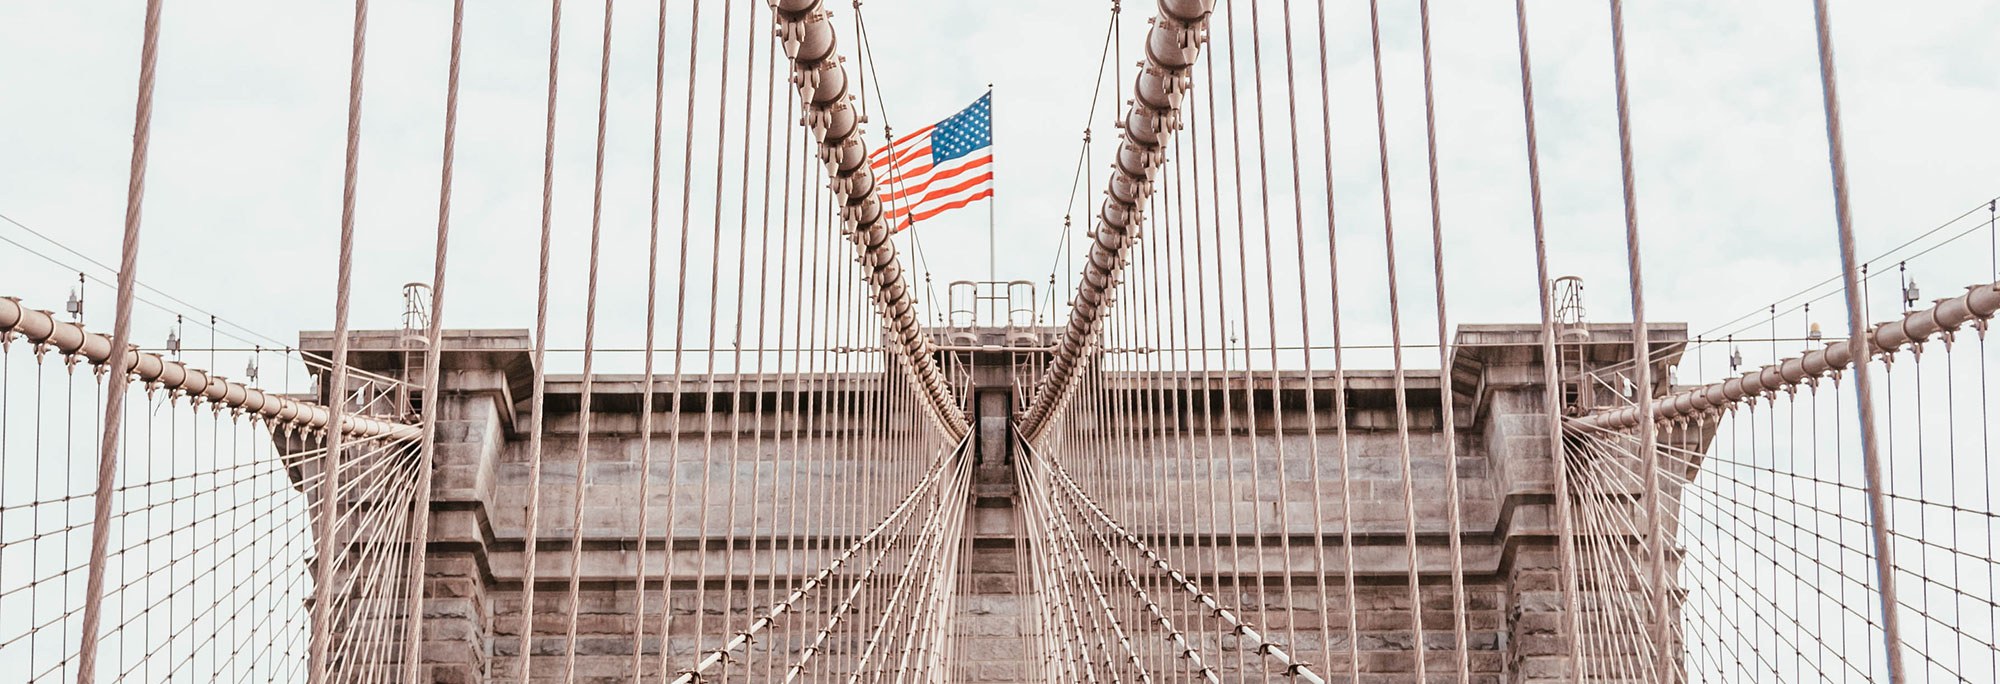 image of top of bridge with american flag at apex